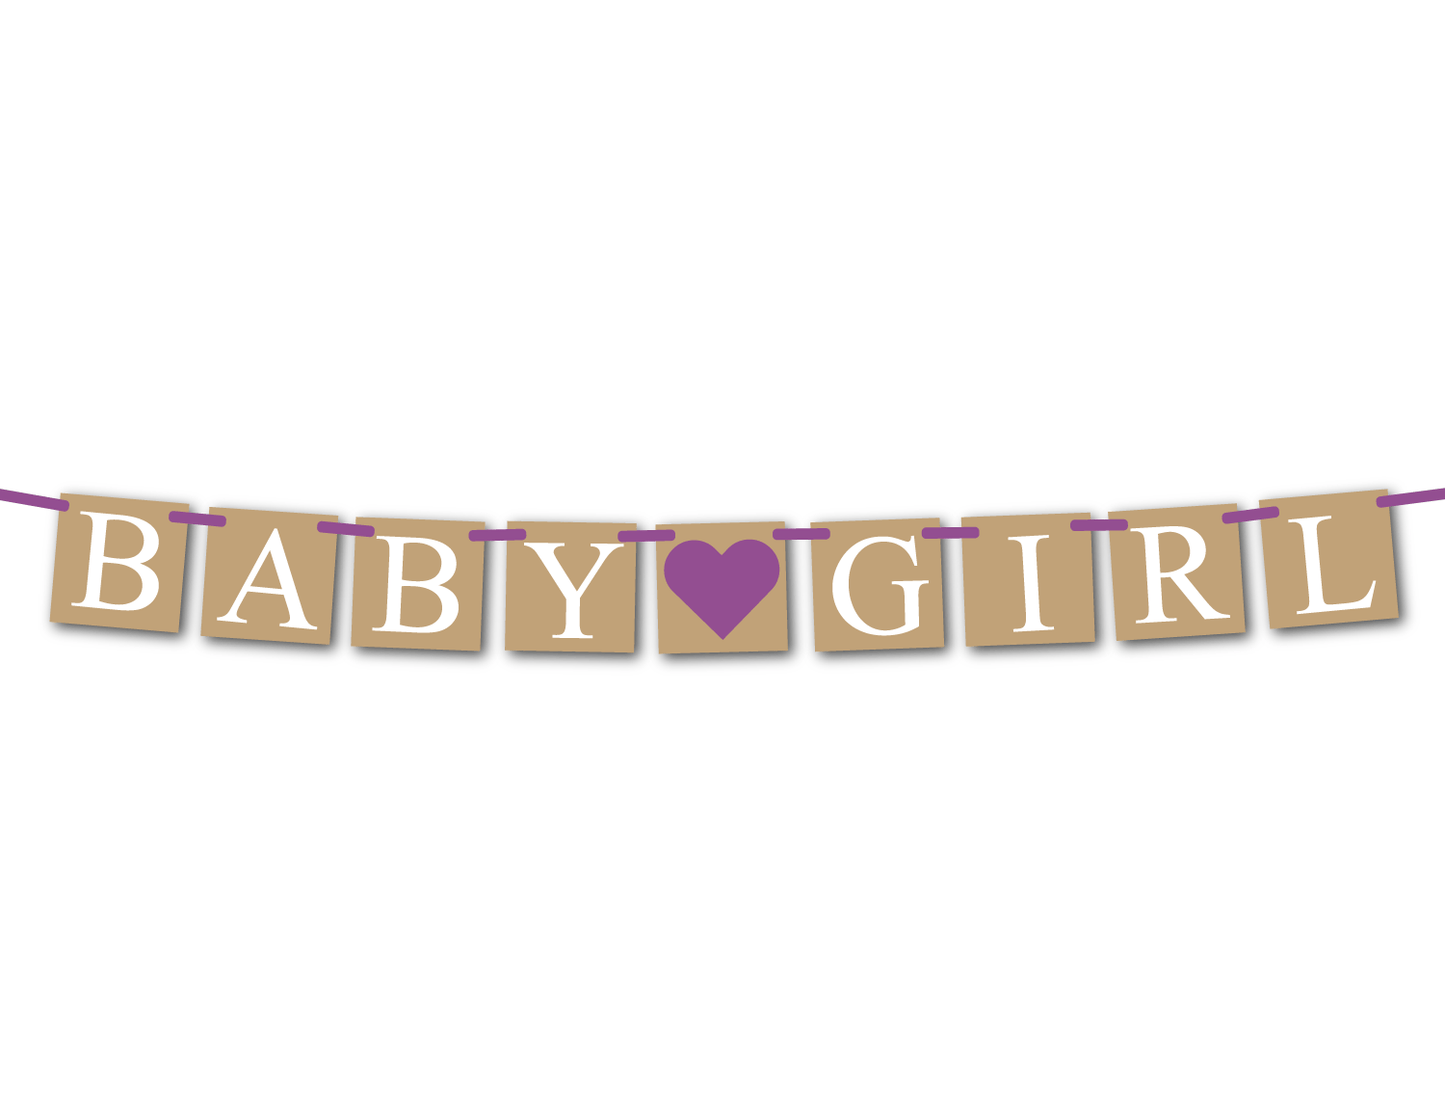 Printable rustic baby girl banner in purple - Celebrating Together